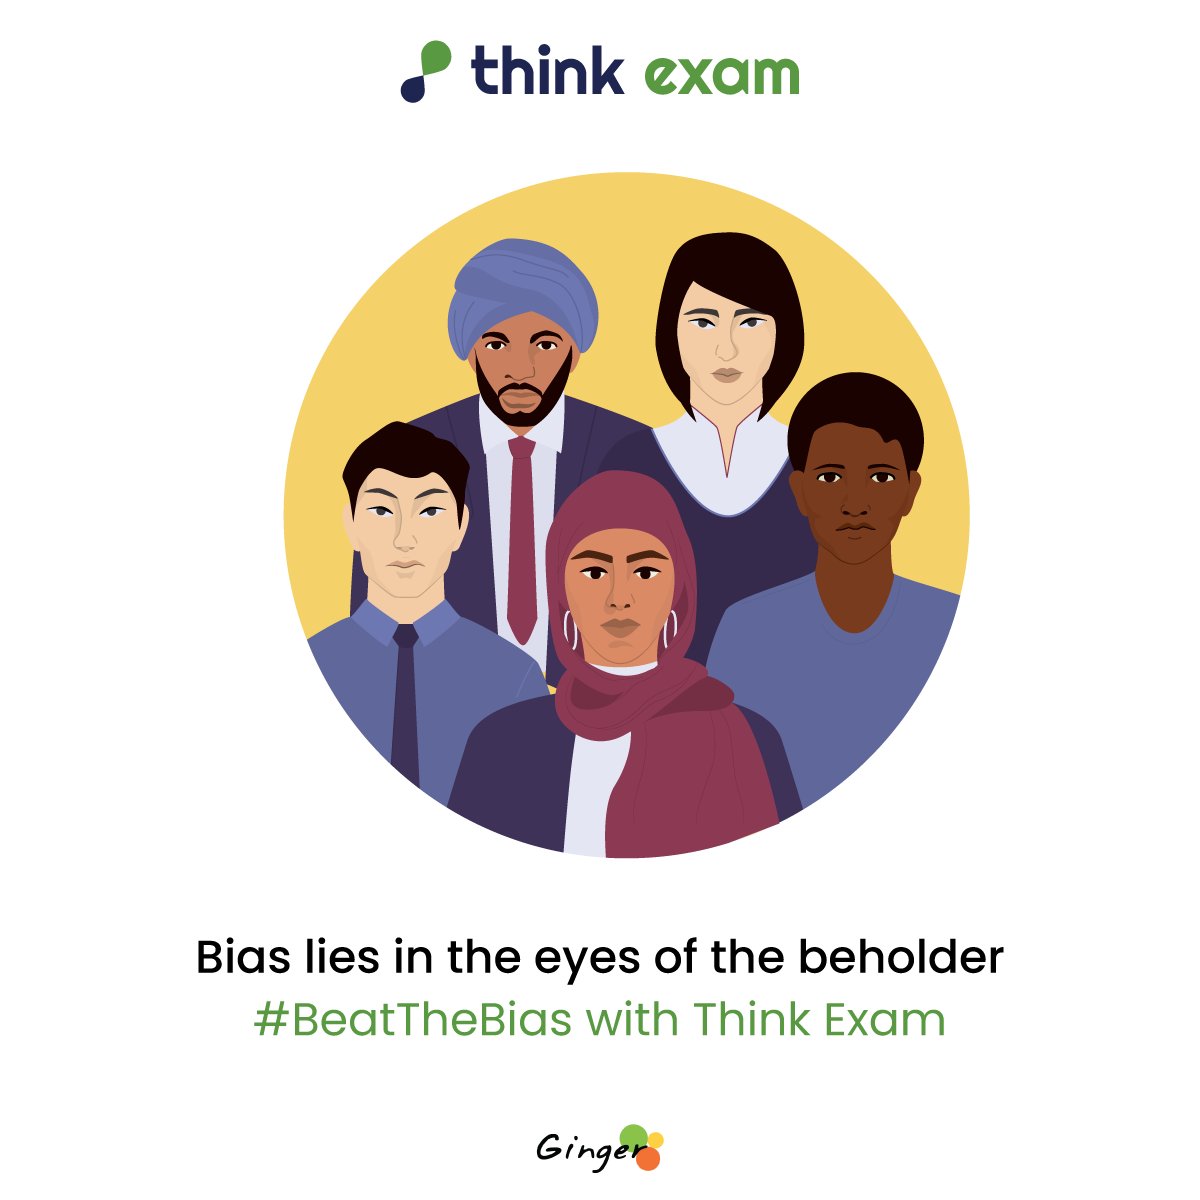 This #ZeroDiscriminationDay, remove #UnconsciousBias & #hiring prejudices when gauging candidates using #ThinkExam’s #assessment platform. Our advanced Test Library focuses on candidate’s competency & reduces risk of unconscious bias.
#GingerWebs #beatthebias #zerodiscrimination